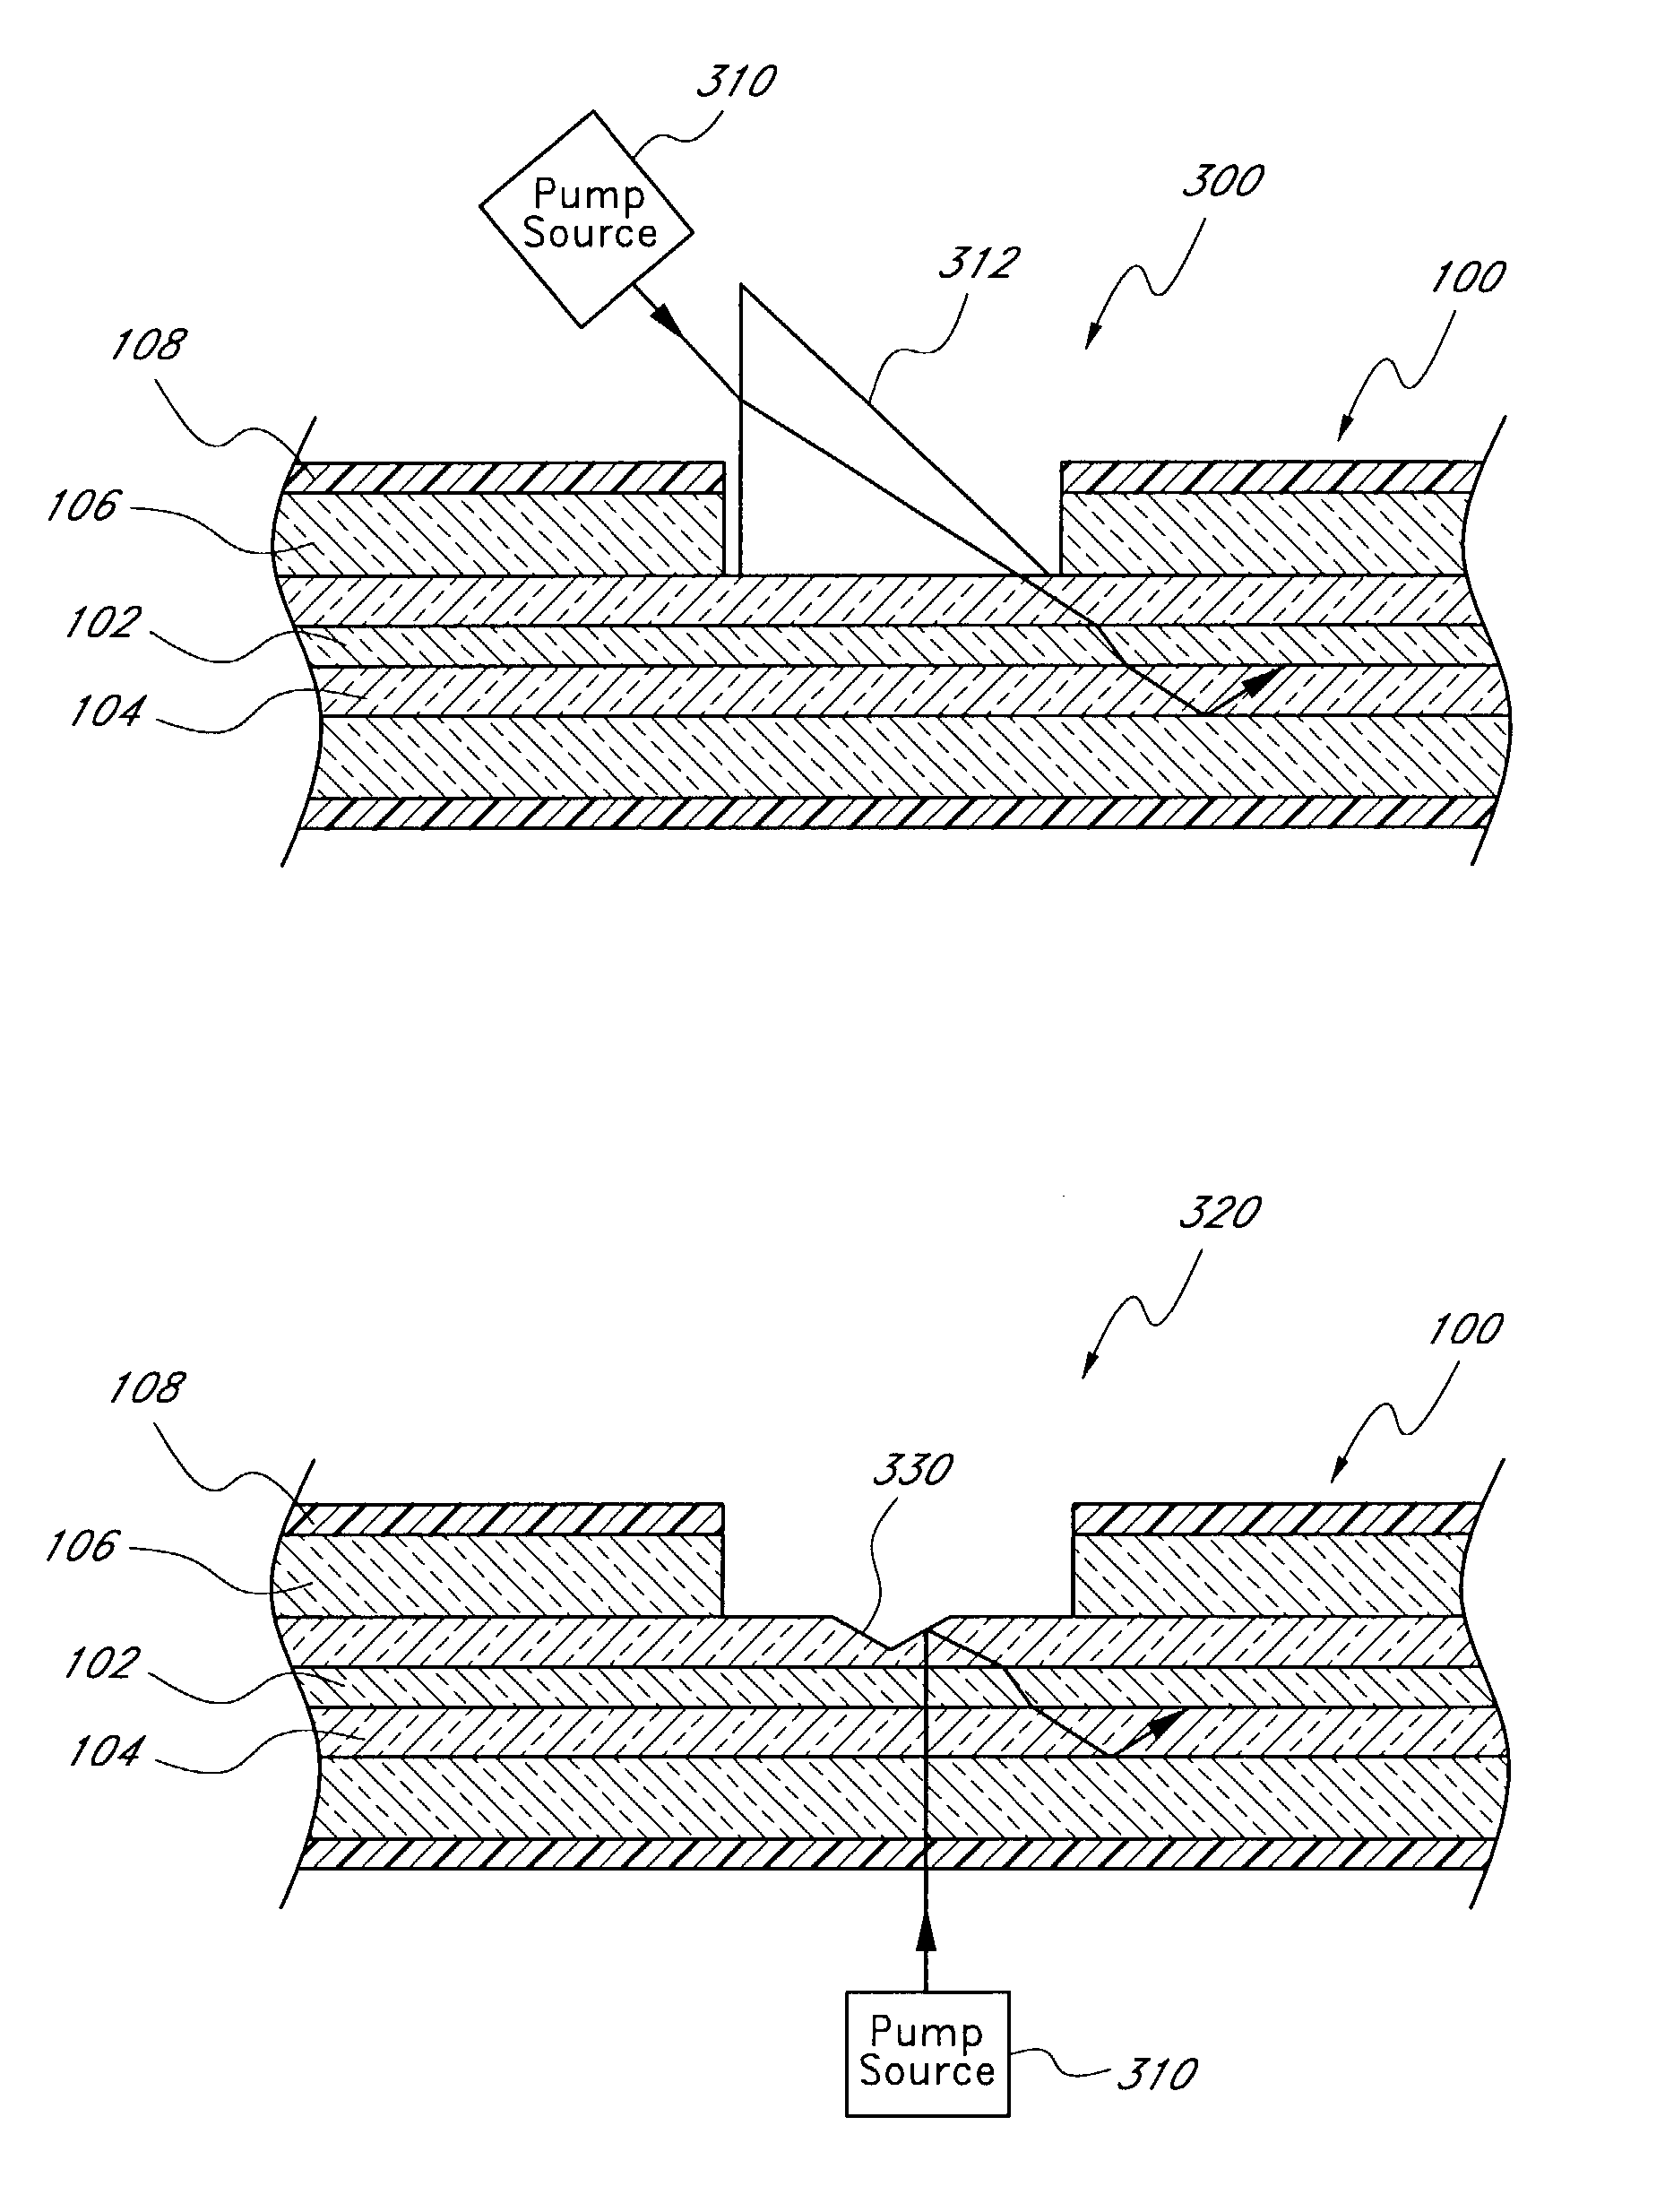 Double-clad fiber lasers and amplifiers having long-period fiber gratings